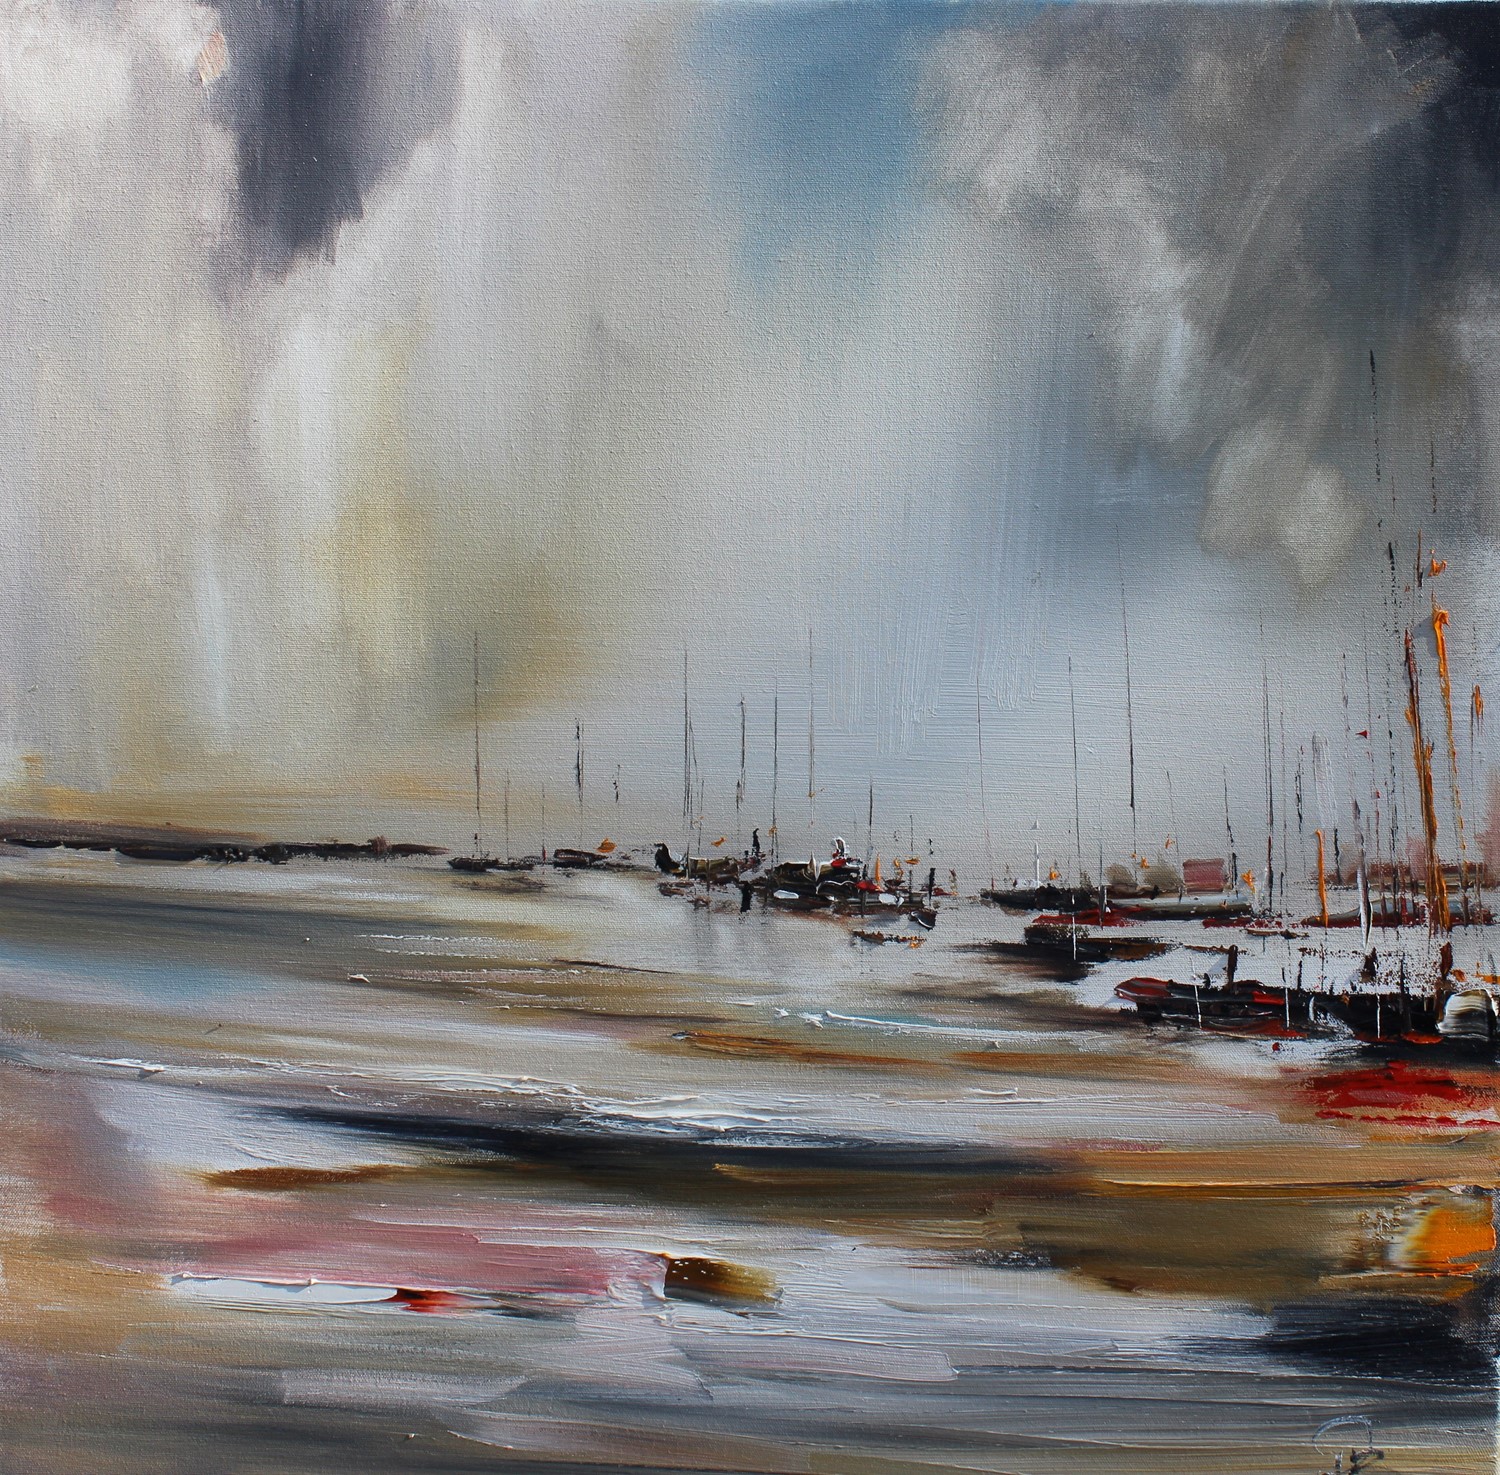 'Sailing on Silvery Waters' by artist Rosanne Barr